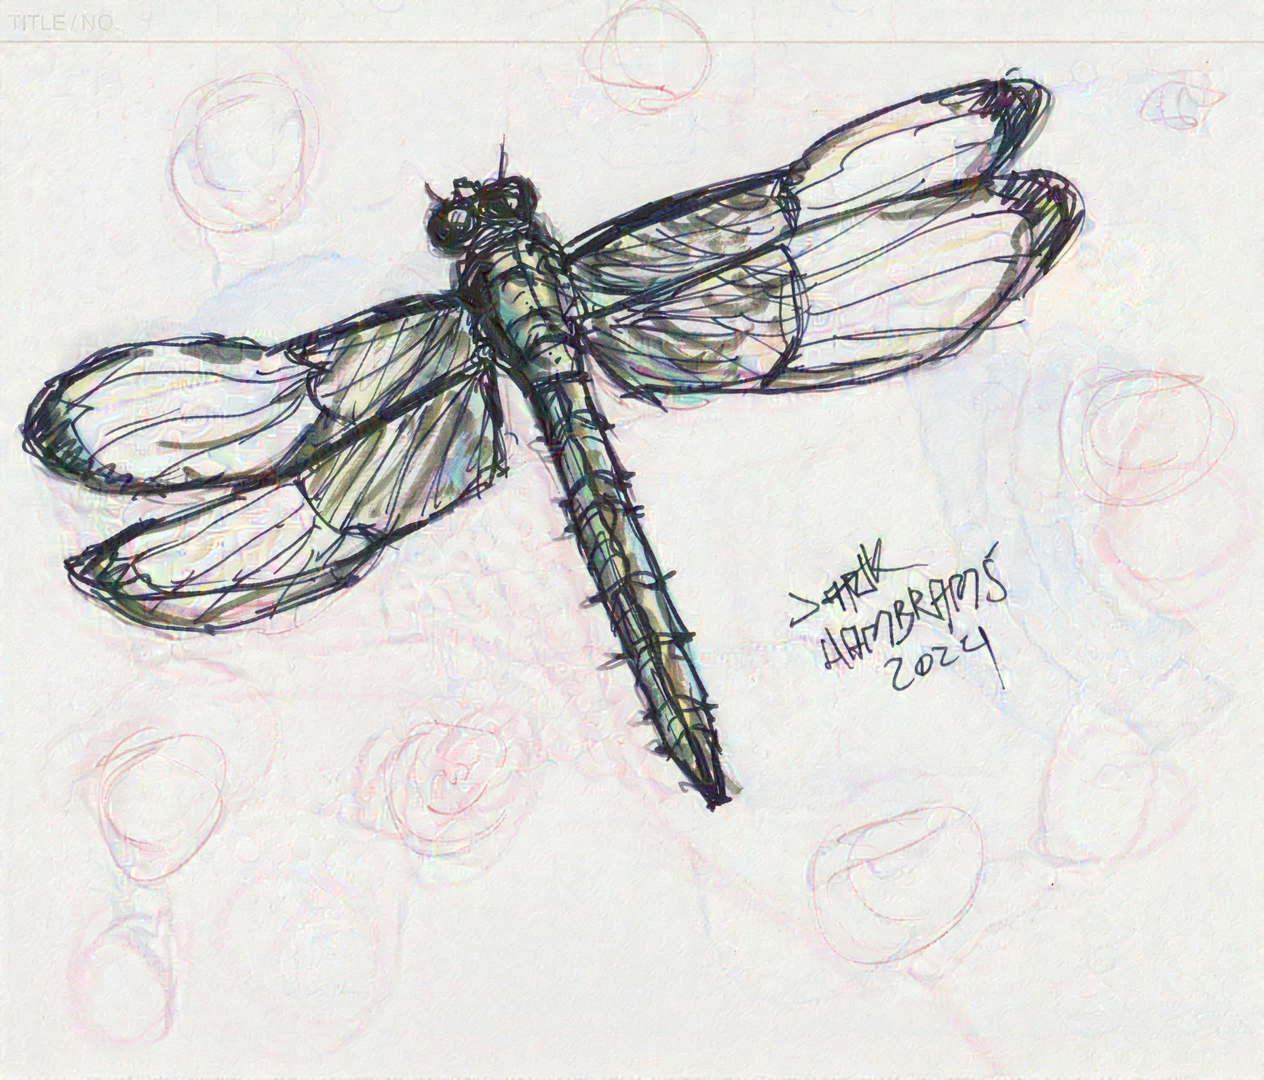 Pen and colored pencil drawing of a dragonfly